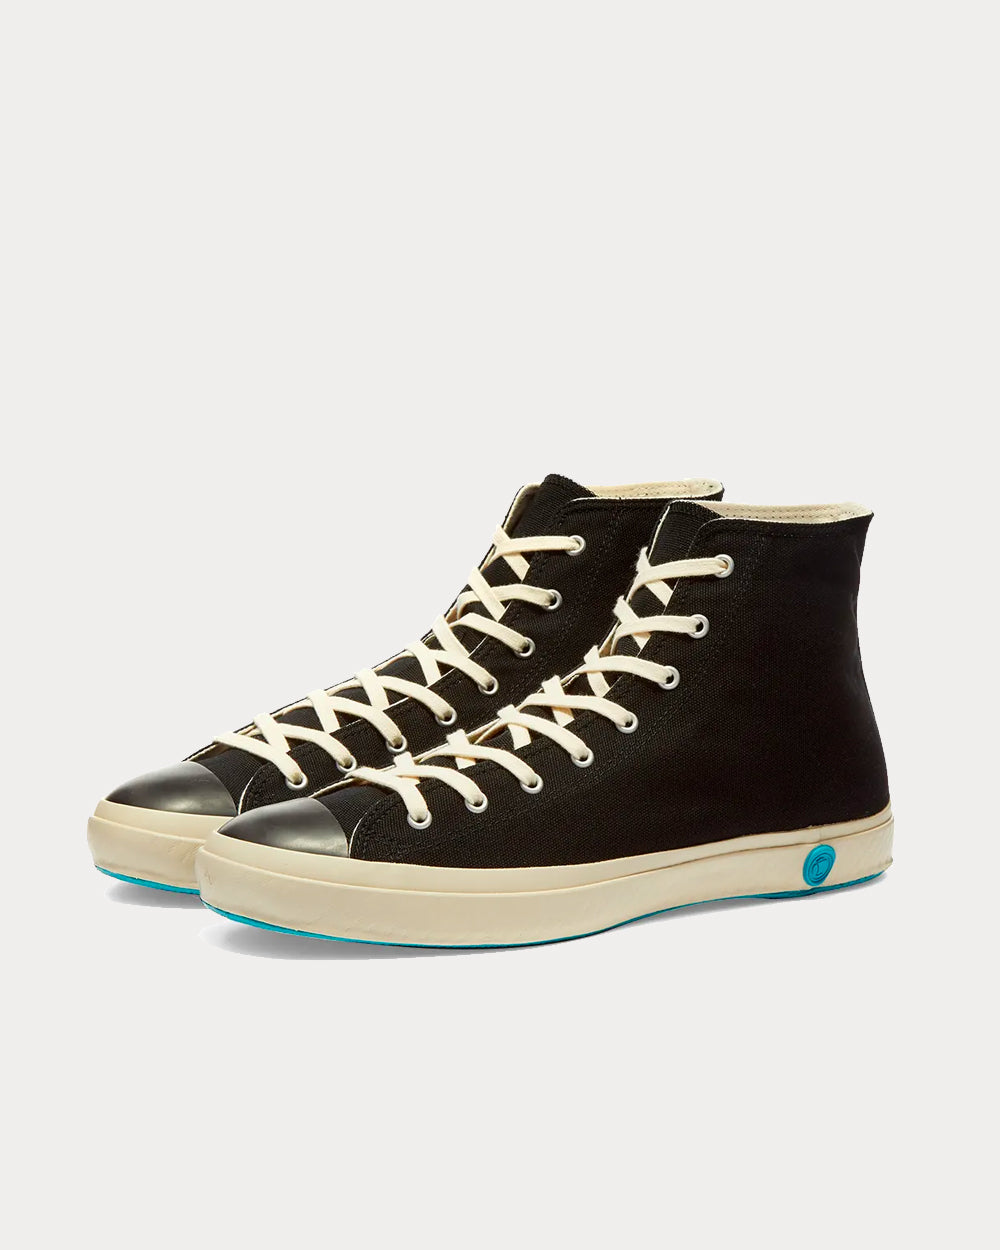 Shoes Like Pottery - 01JP Black High Top Sneakers